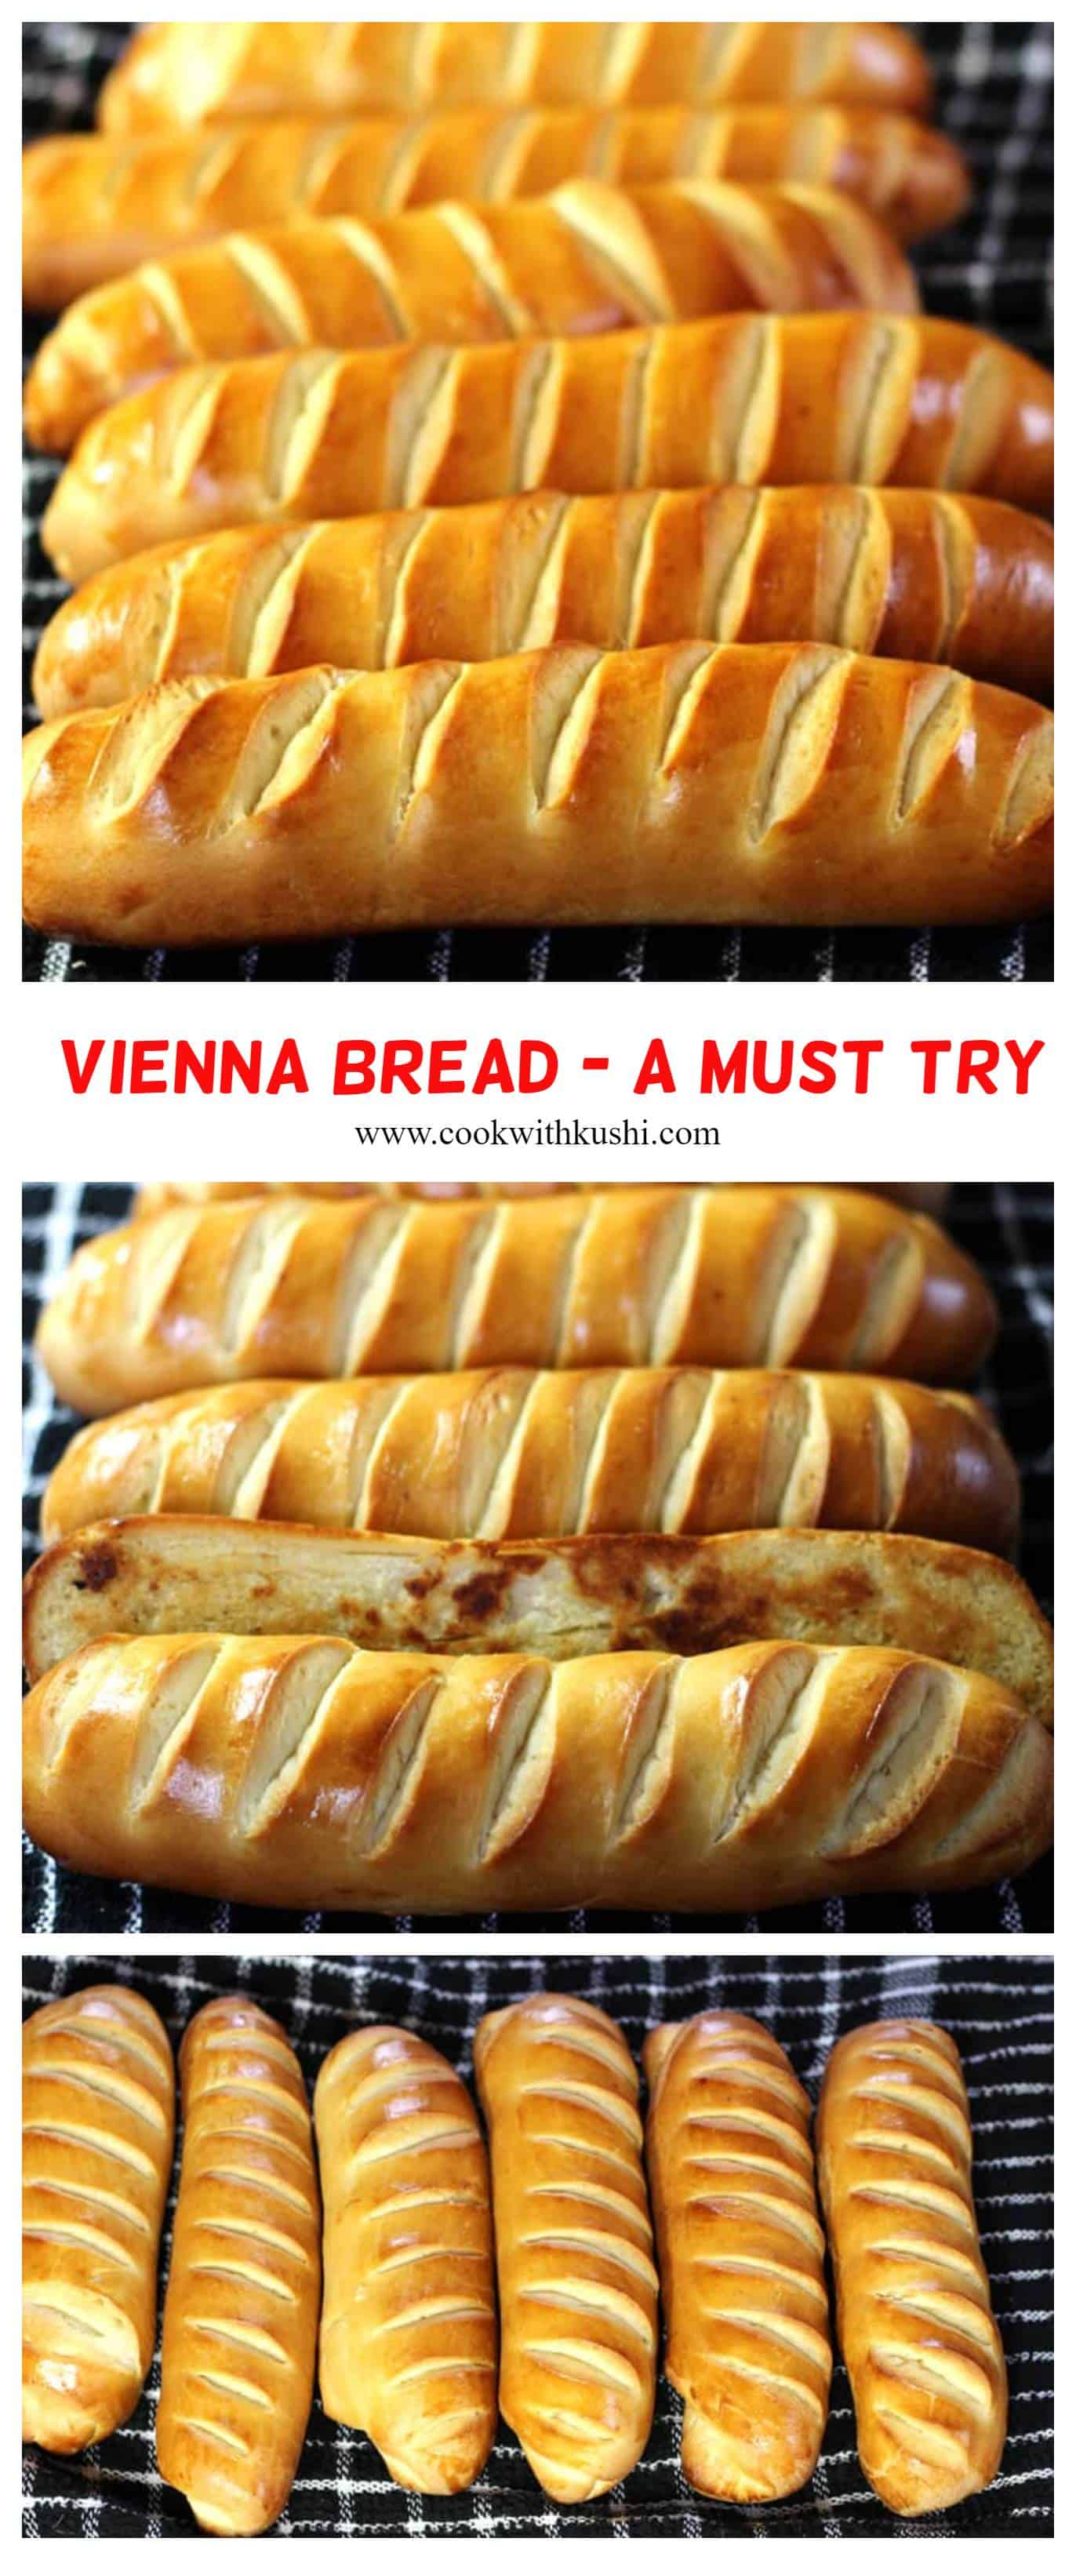 Vienna Bread or Pain Viennois is an absolutely delicious and irresistible Austrian bread that one must definitely not miss try. #breadrolls #sandwichbread #breakfastbread #dinnersides #austrianbreadrolls #viennabreadsandwich #sourdoughbread